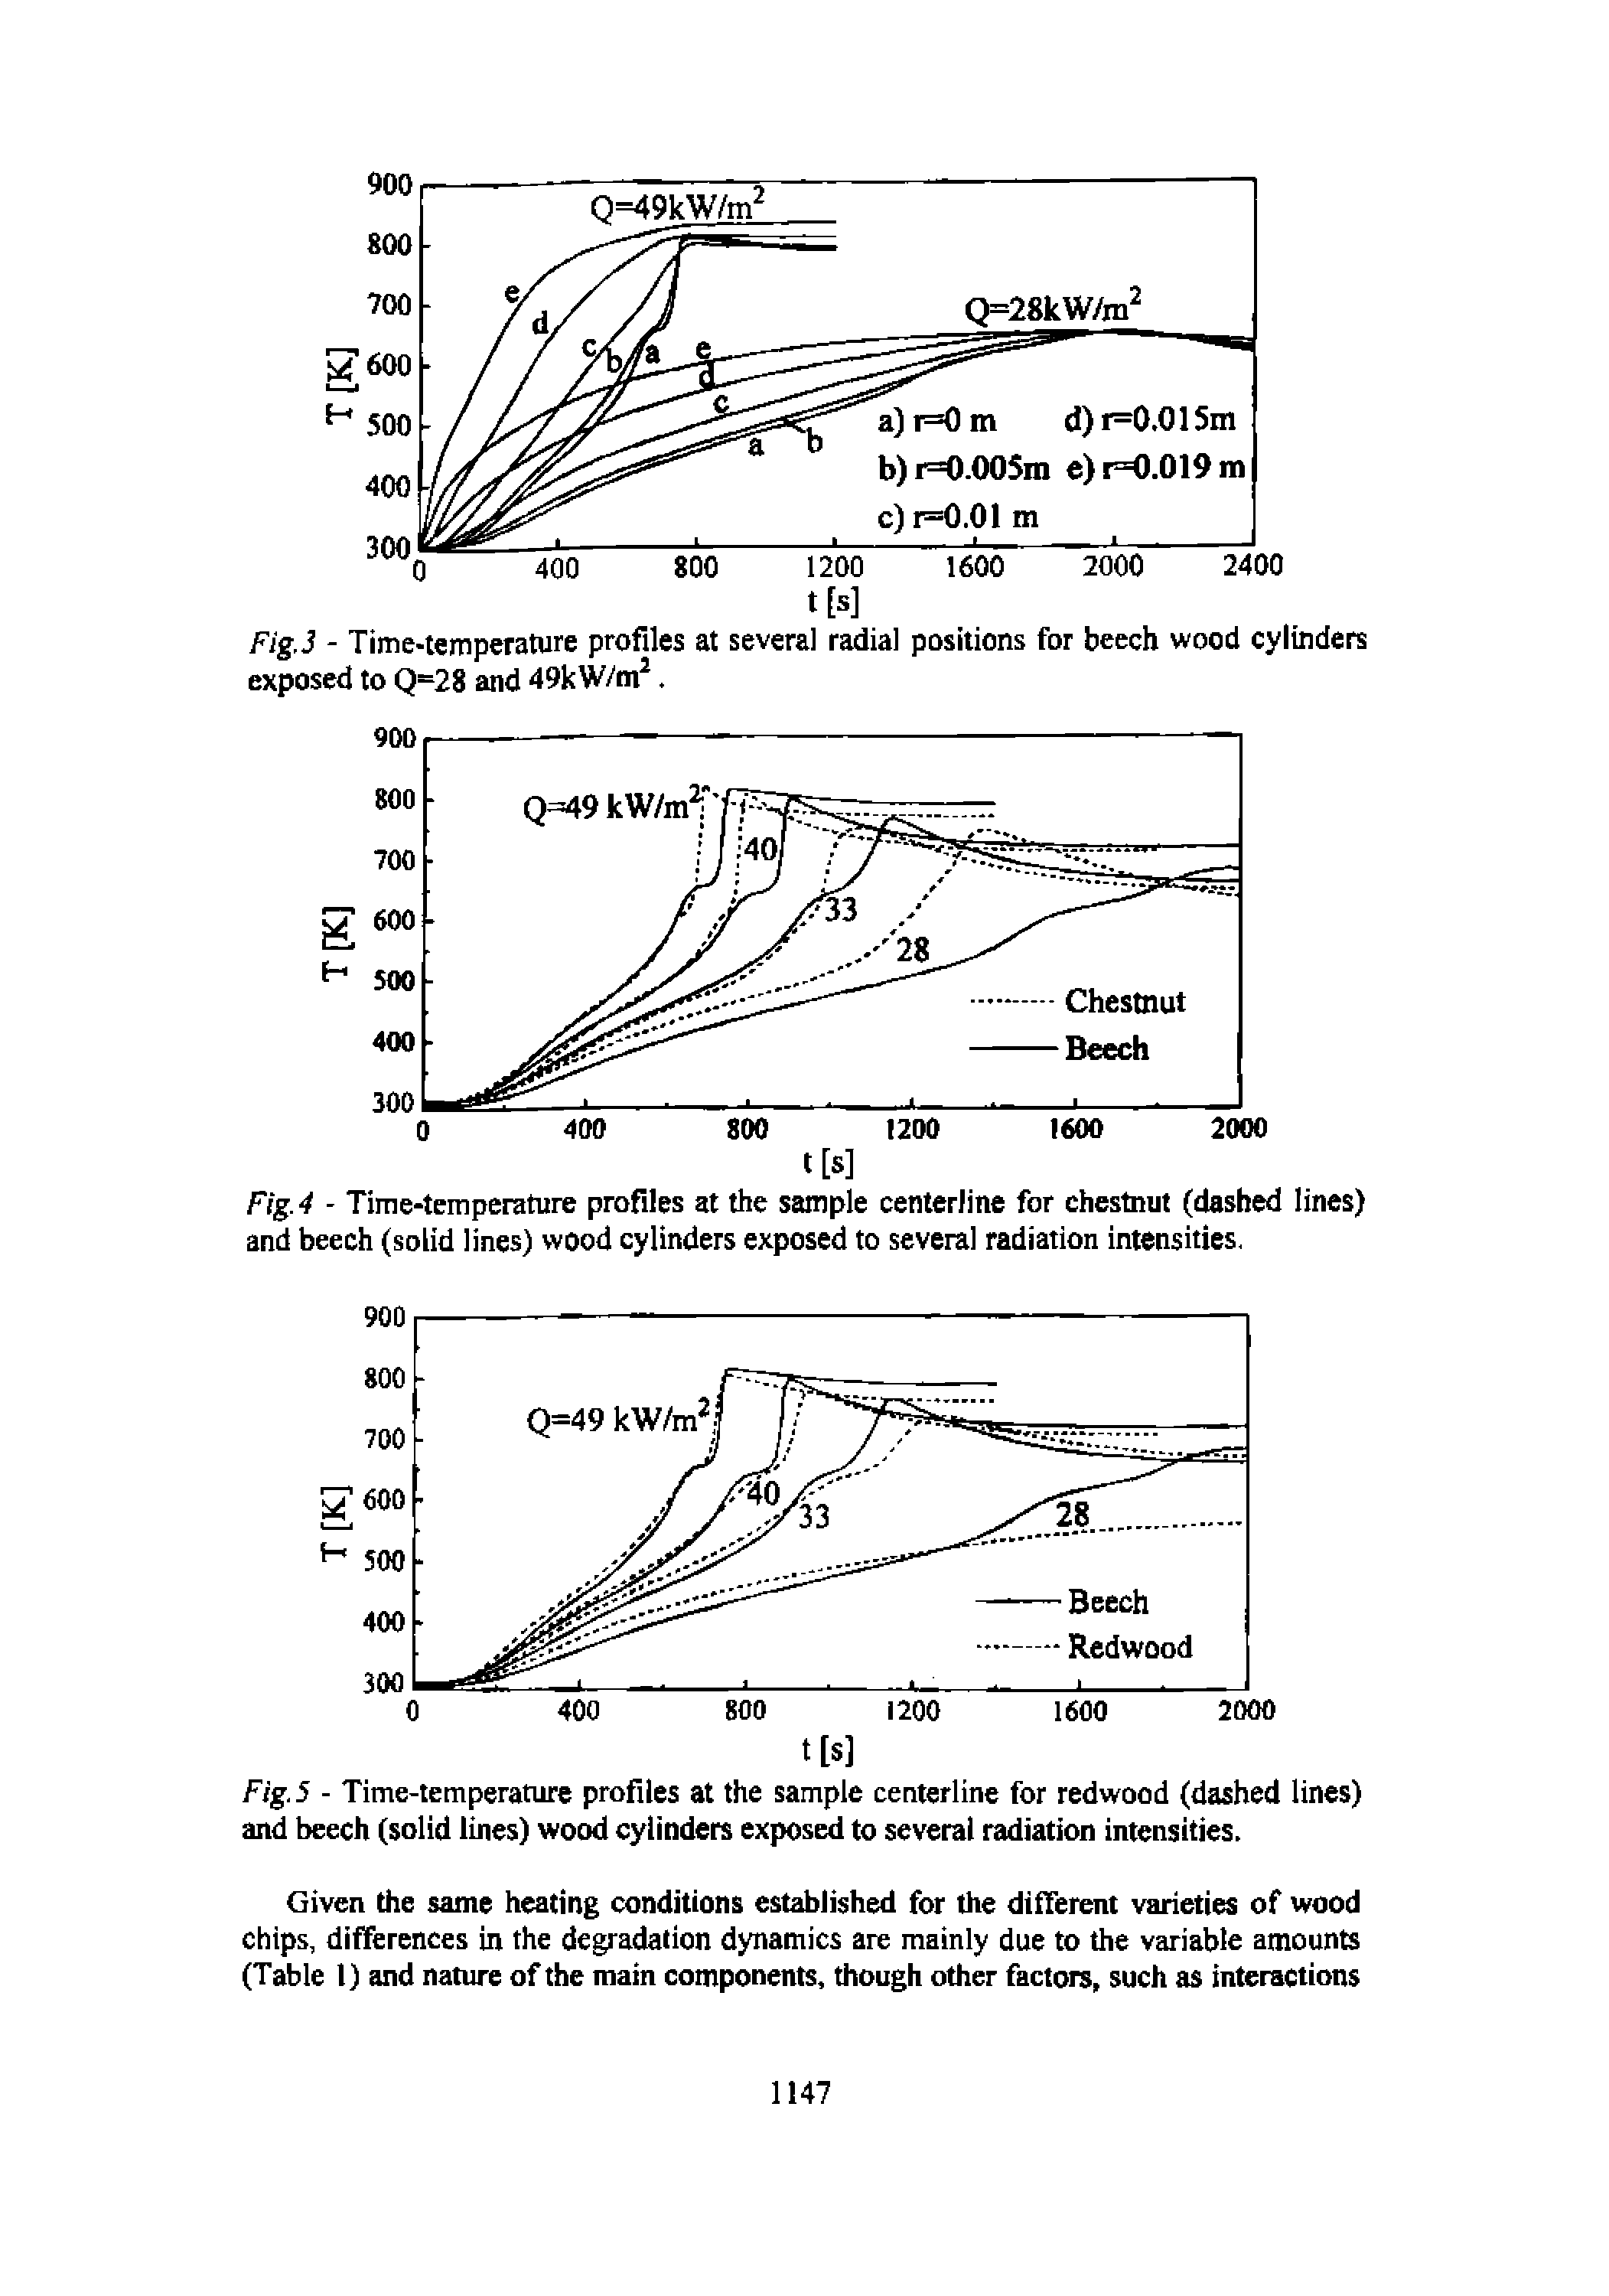 Fig.4 - Time-temperature profiles at the sample centerline for chestnut (dashed lines) and beech (solid lines) wood cylinders exposed to several radiation intensities.